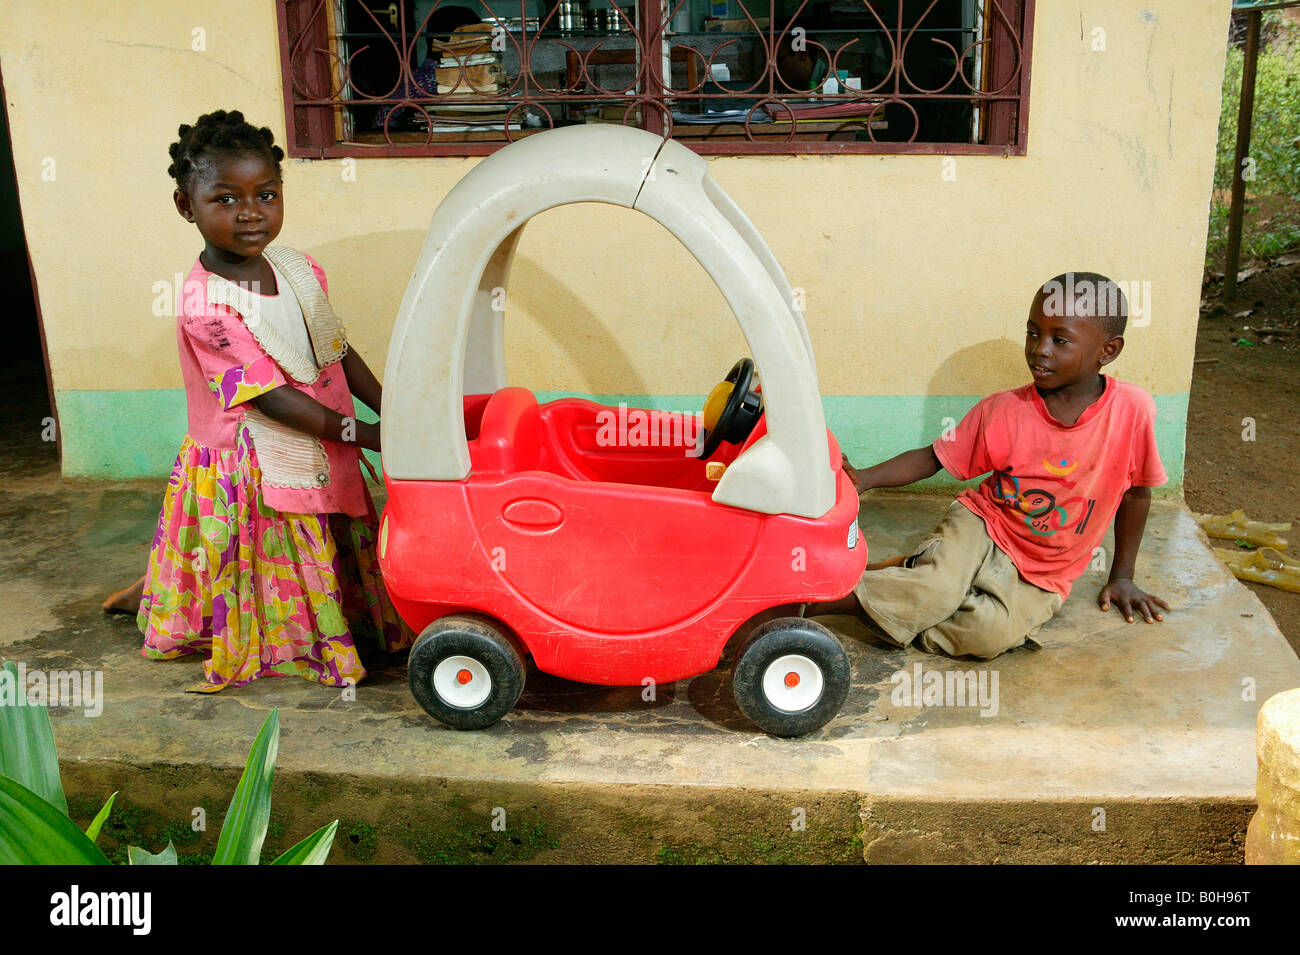 Boy and girl playing with a peddle car at an AIDS / HIV orphanage in Douala, Cameroon, Africa Stock Photo